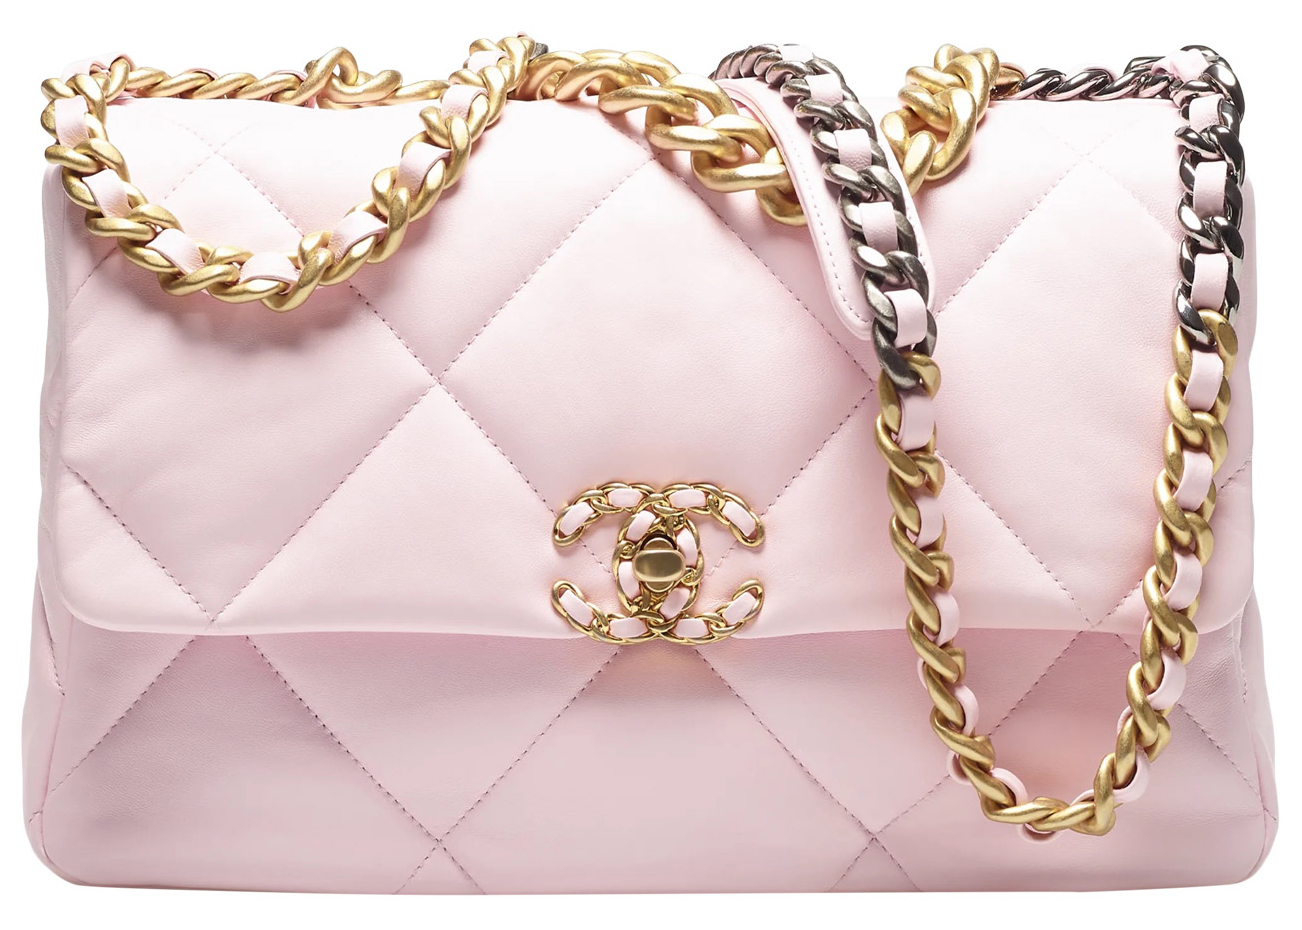 Chanel 19 Bag Review  Is it Worth it  FROM LUXE WITH LOVE